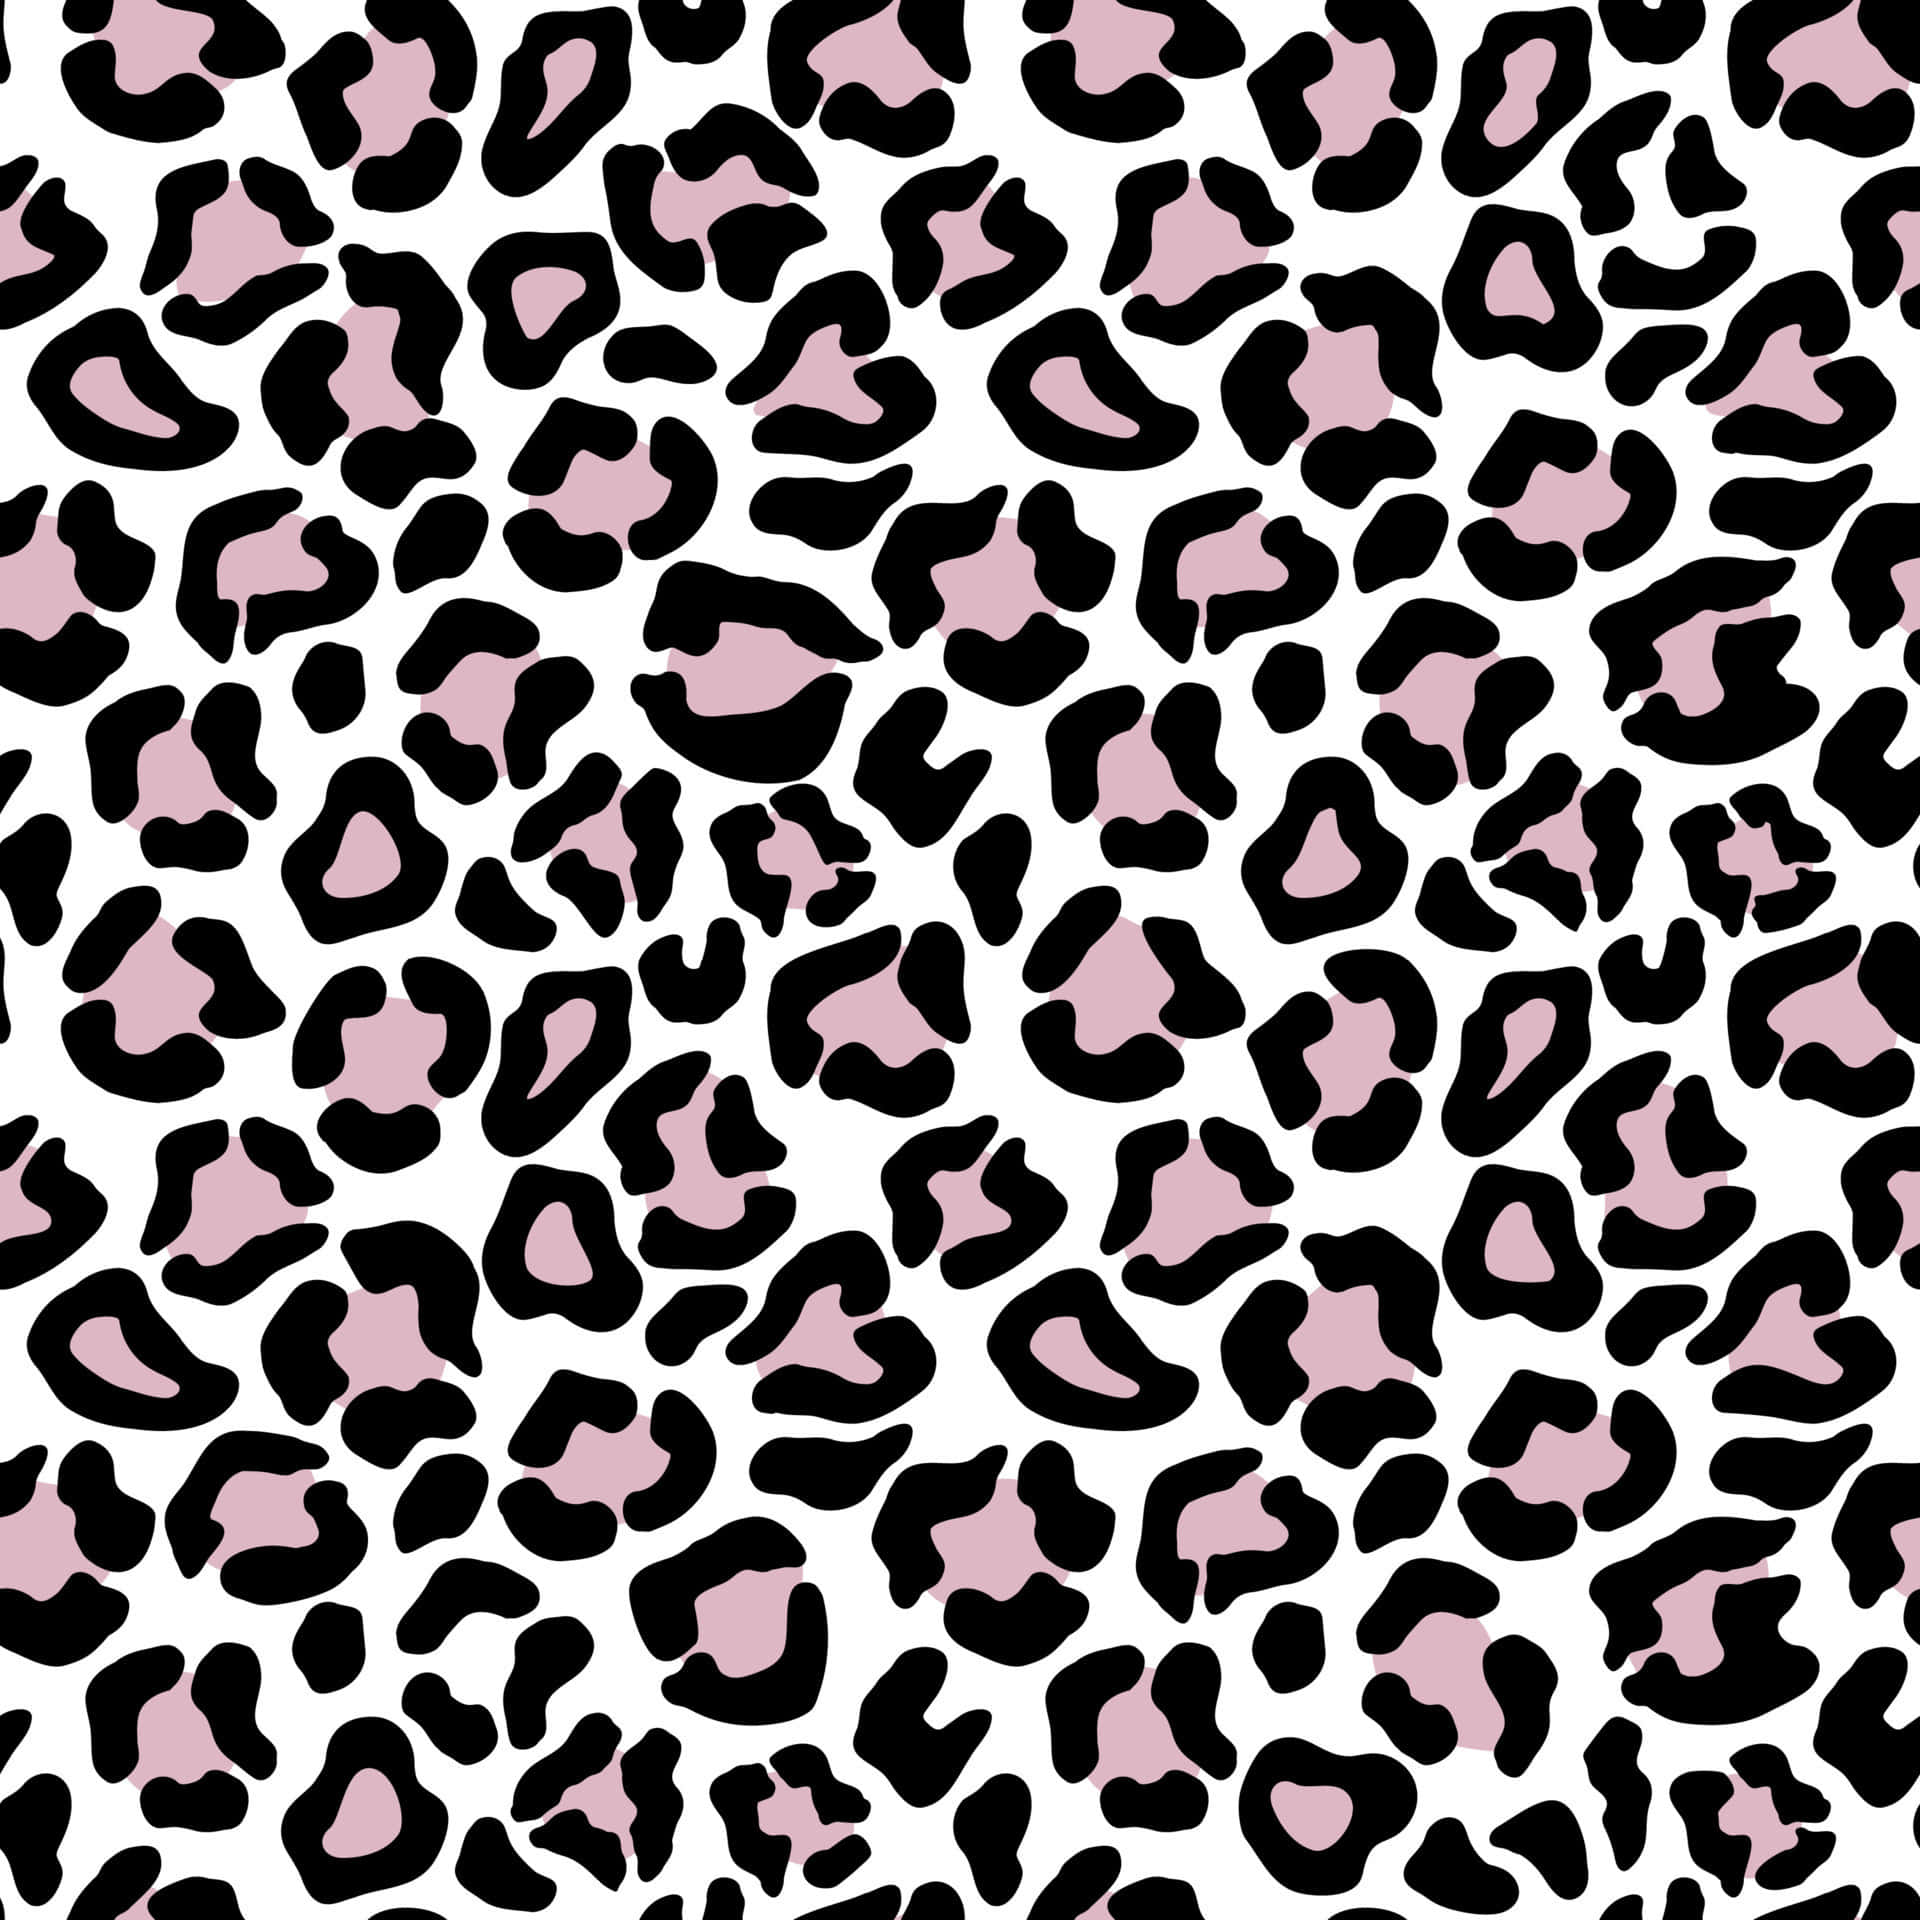 A Leopard Print Pattern With Pink And Black Spots Wallpaper